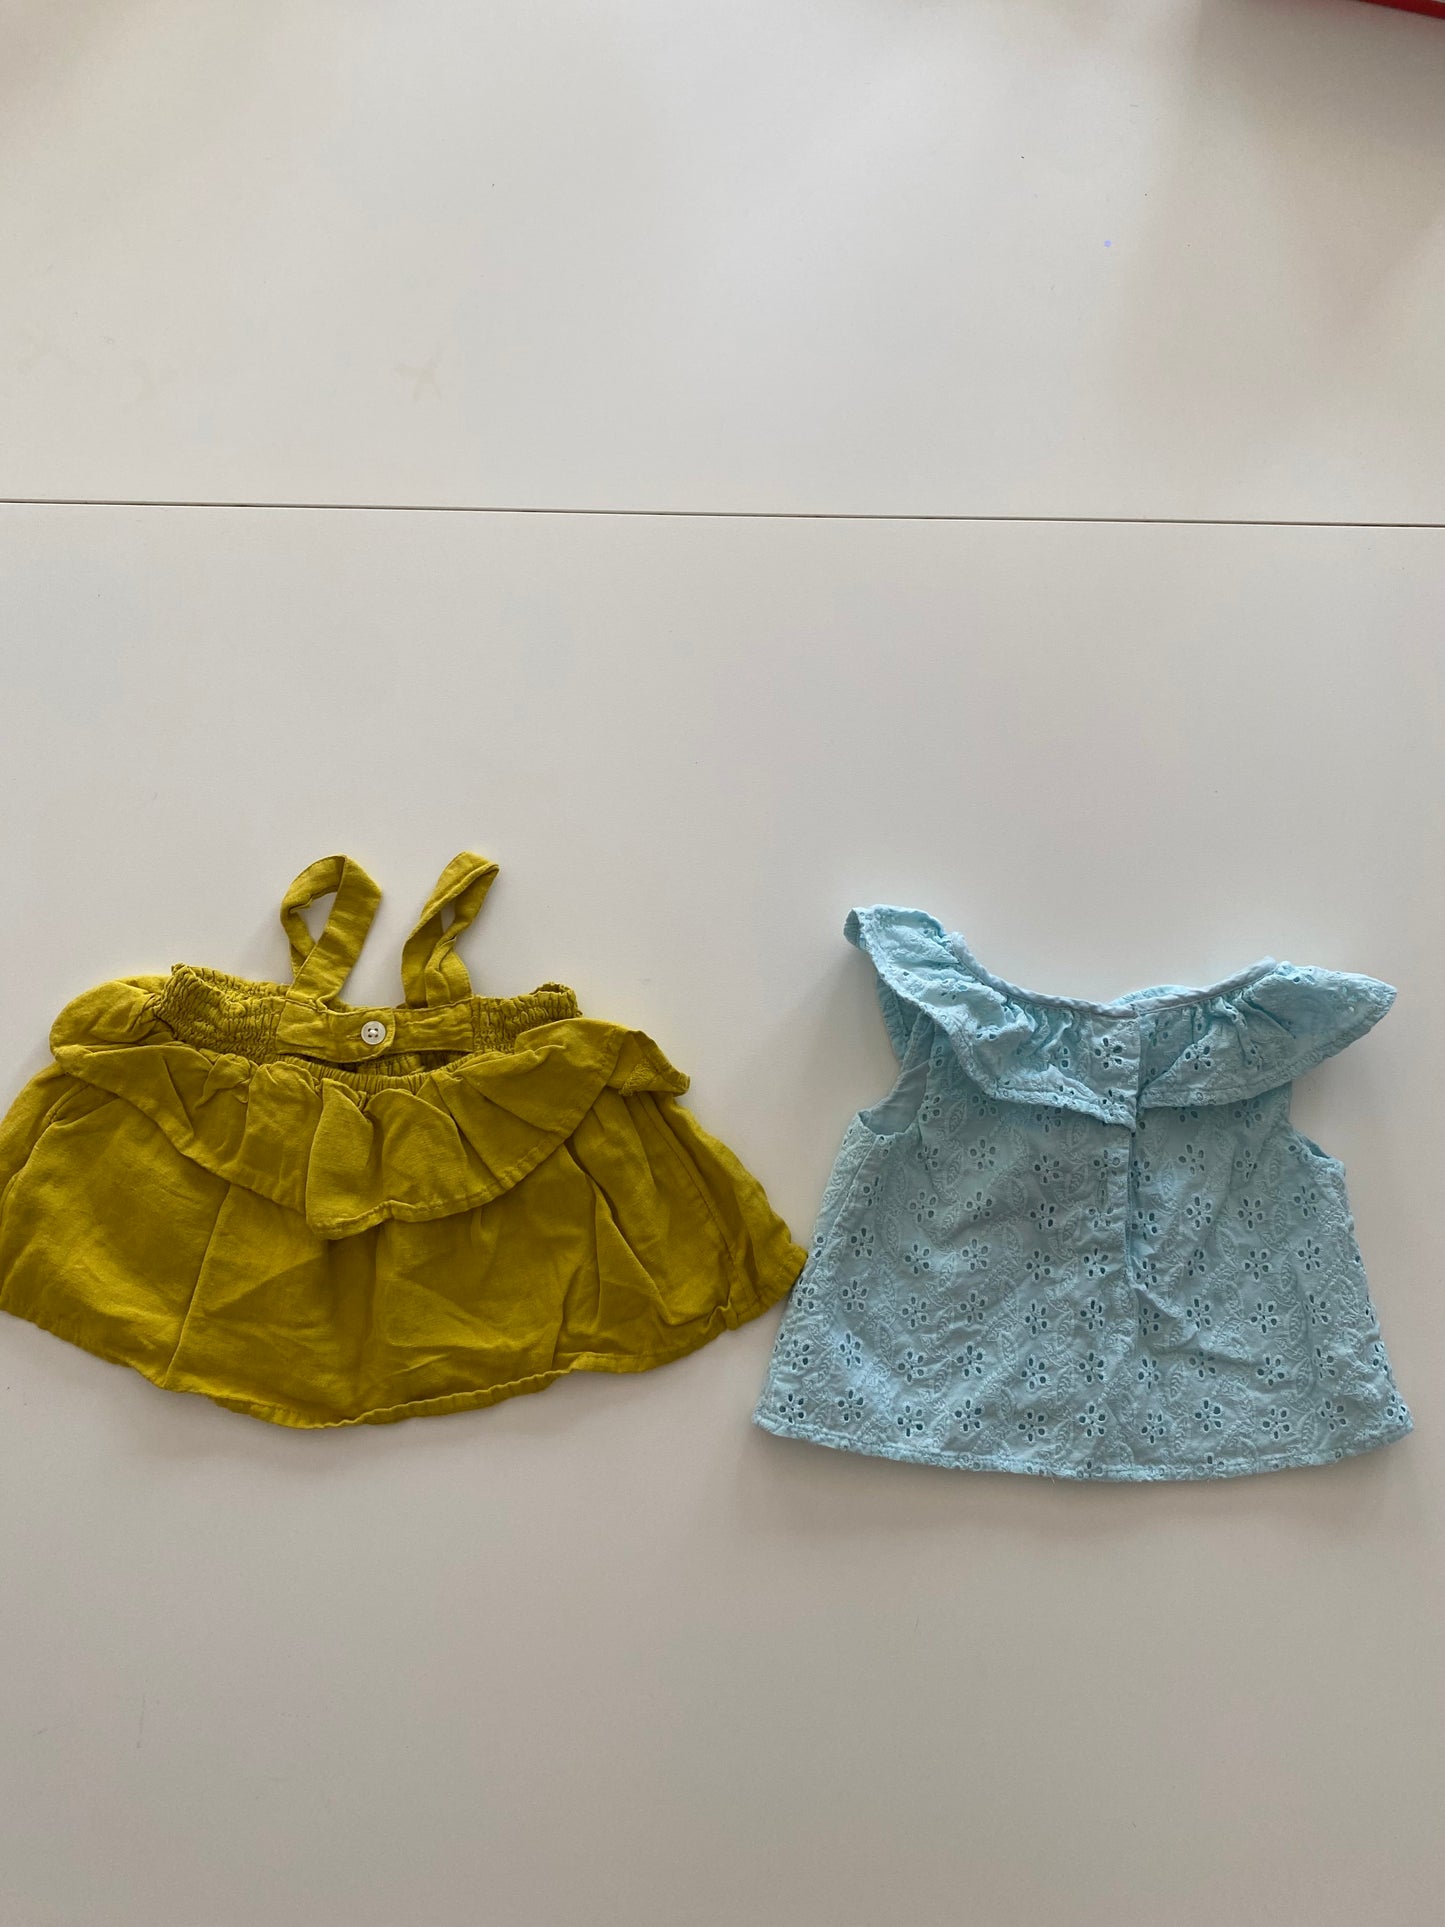 Janie and Jack blue eyelet crop top Girls 18-24M and Old Navy pea green ruffle blouse Girls 2T